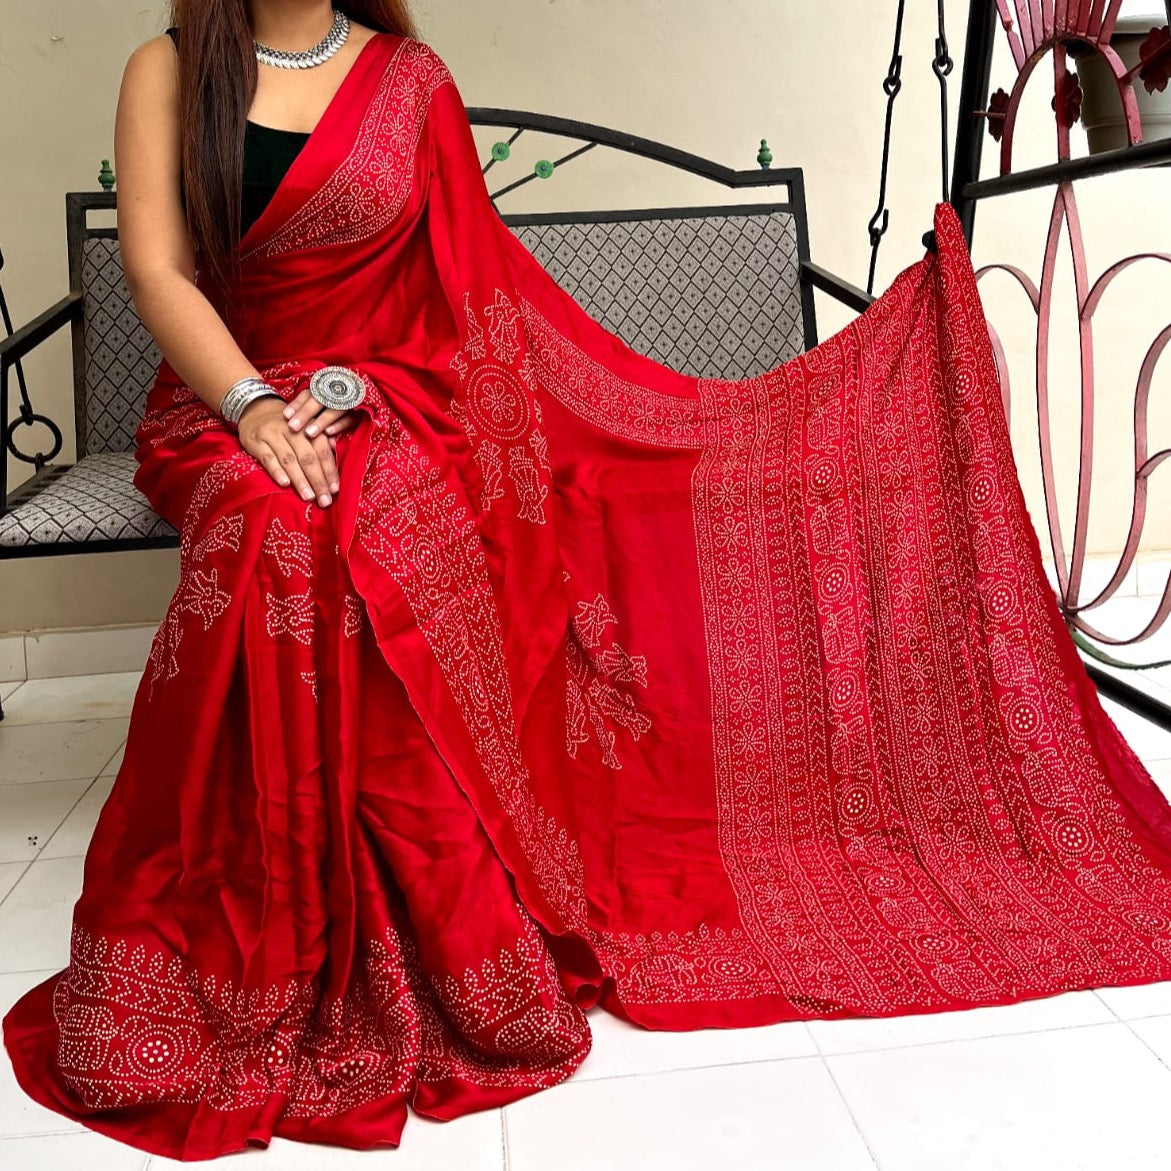 Modal Silk Ajrakh Saree With Natural Dyes -Maroon, Red, Bottle Green,Rani Pink, Blue, Navy Blue.